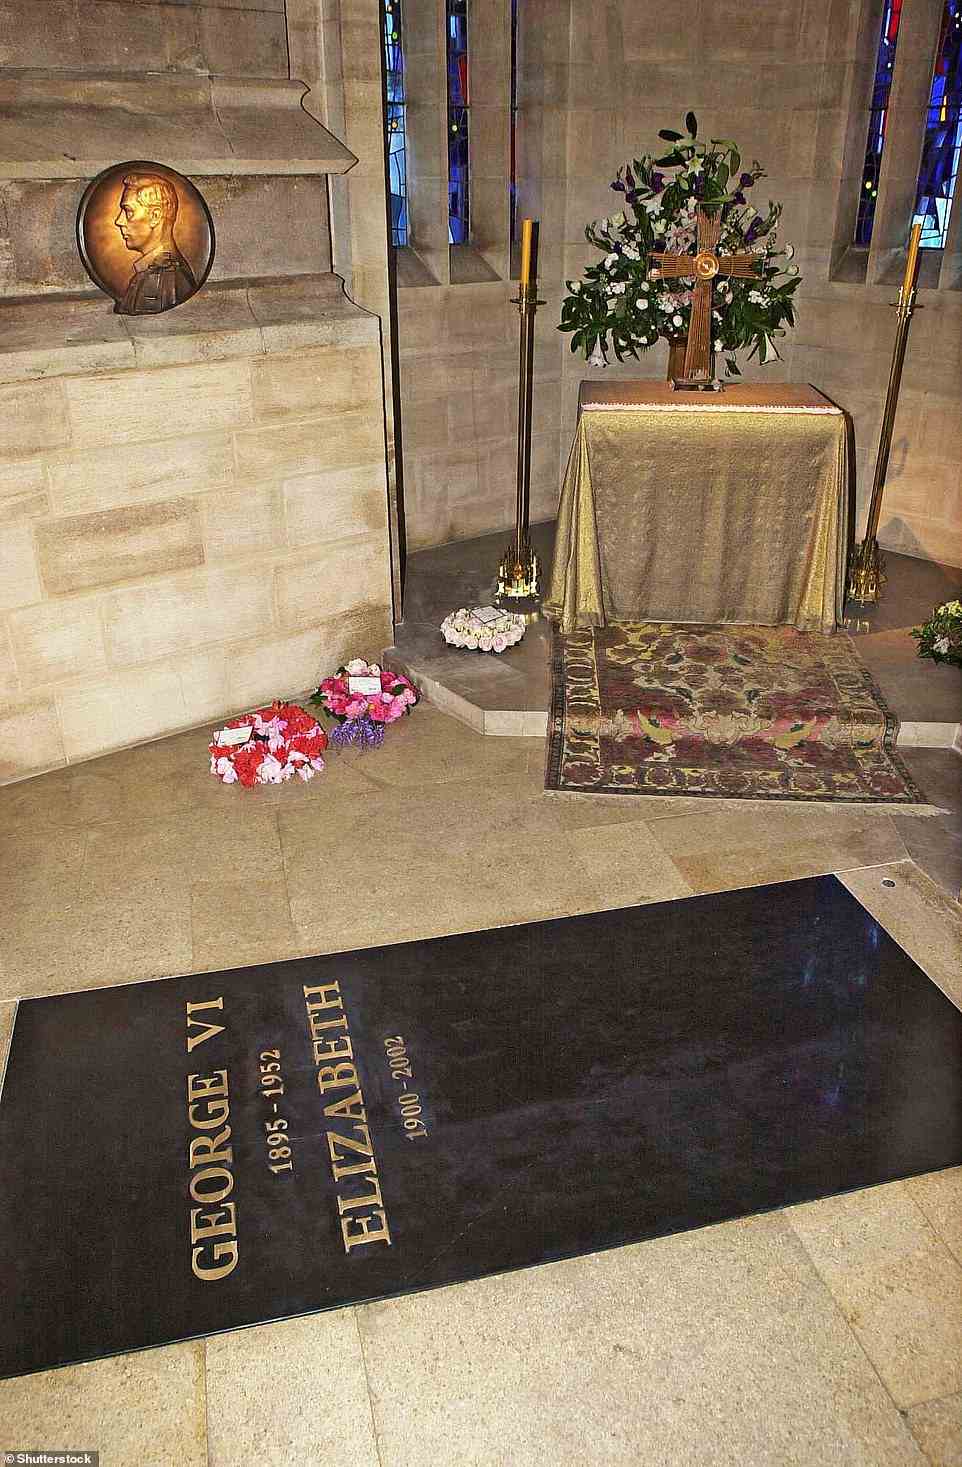 Her Majesty was interred alongside her husband, Prince Philip, and her parents King George VI and Queen Elizabeth, the Queen Mother. Pictured: A stone in the George VI Memorial Chapel at St George's Chapel in Windsor, where the Queen Mother was laid to rest in 2002